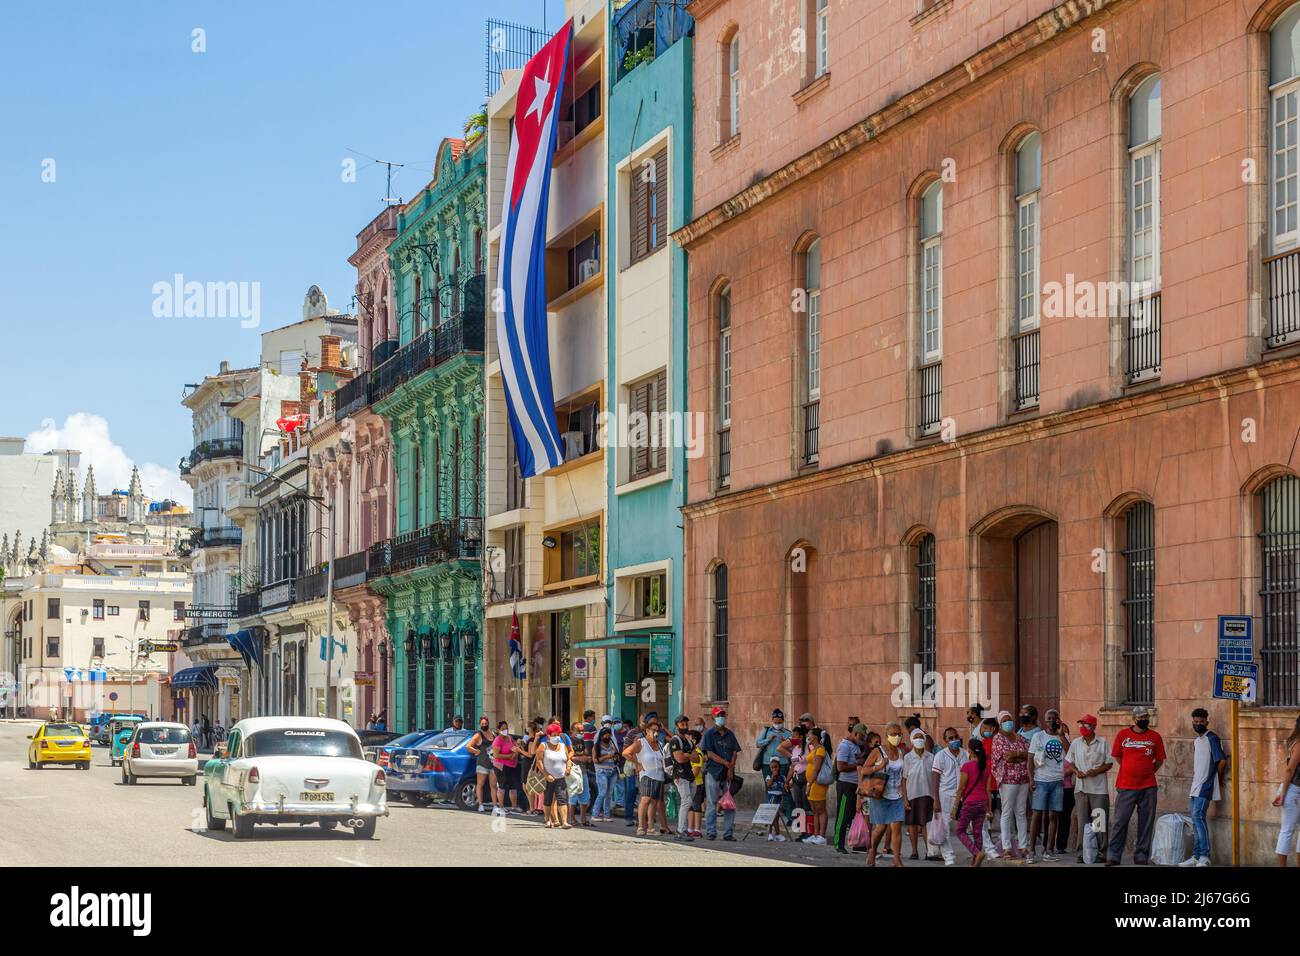 Large group of people waiting for a public omnibus in a bus stop. A large Cuban flag hangs from a government building. An old American car drive in th Stock Photo